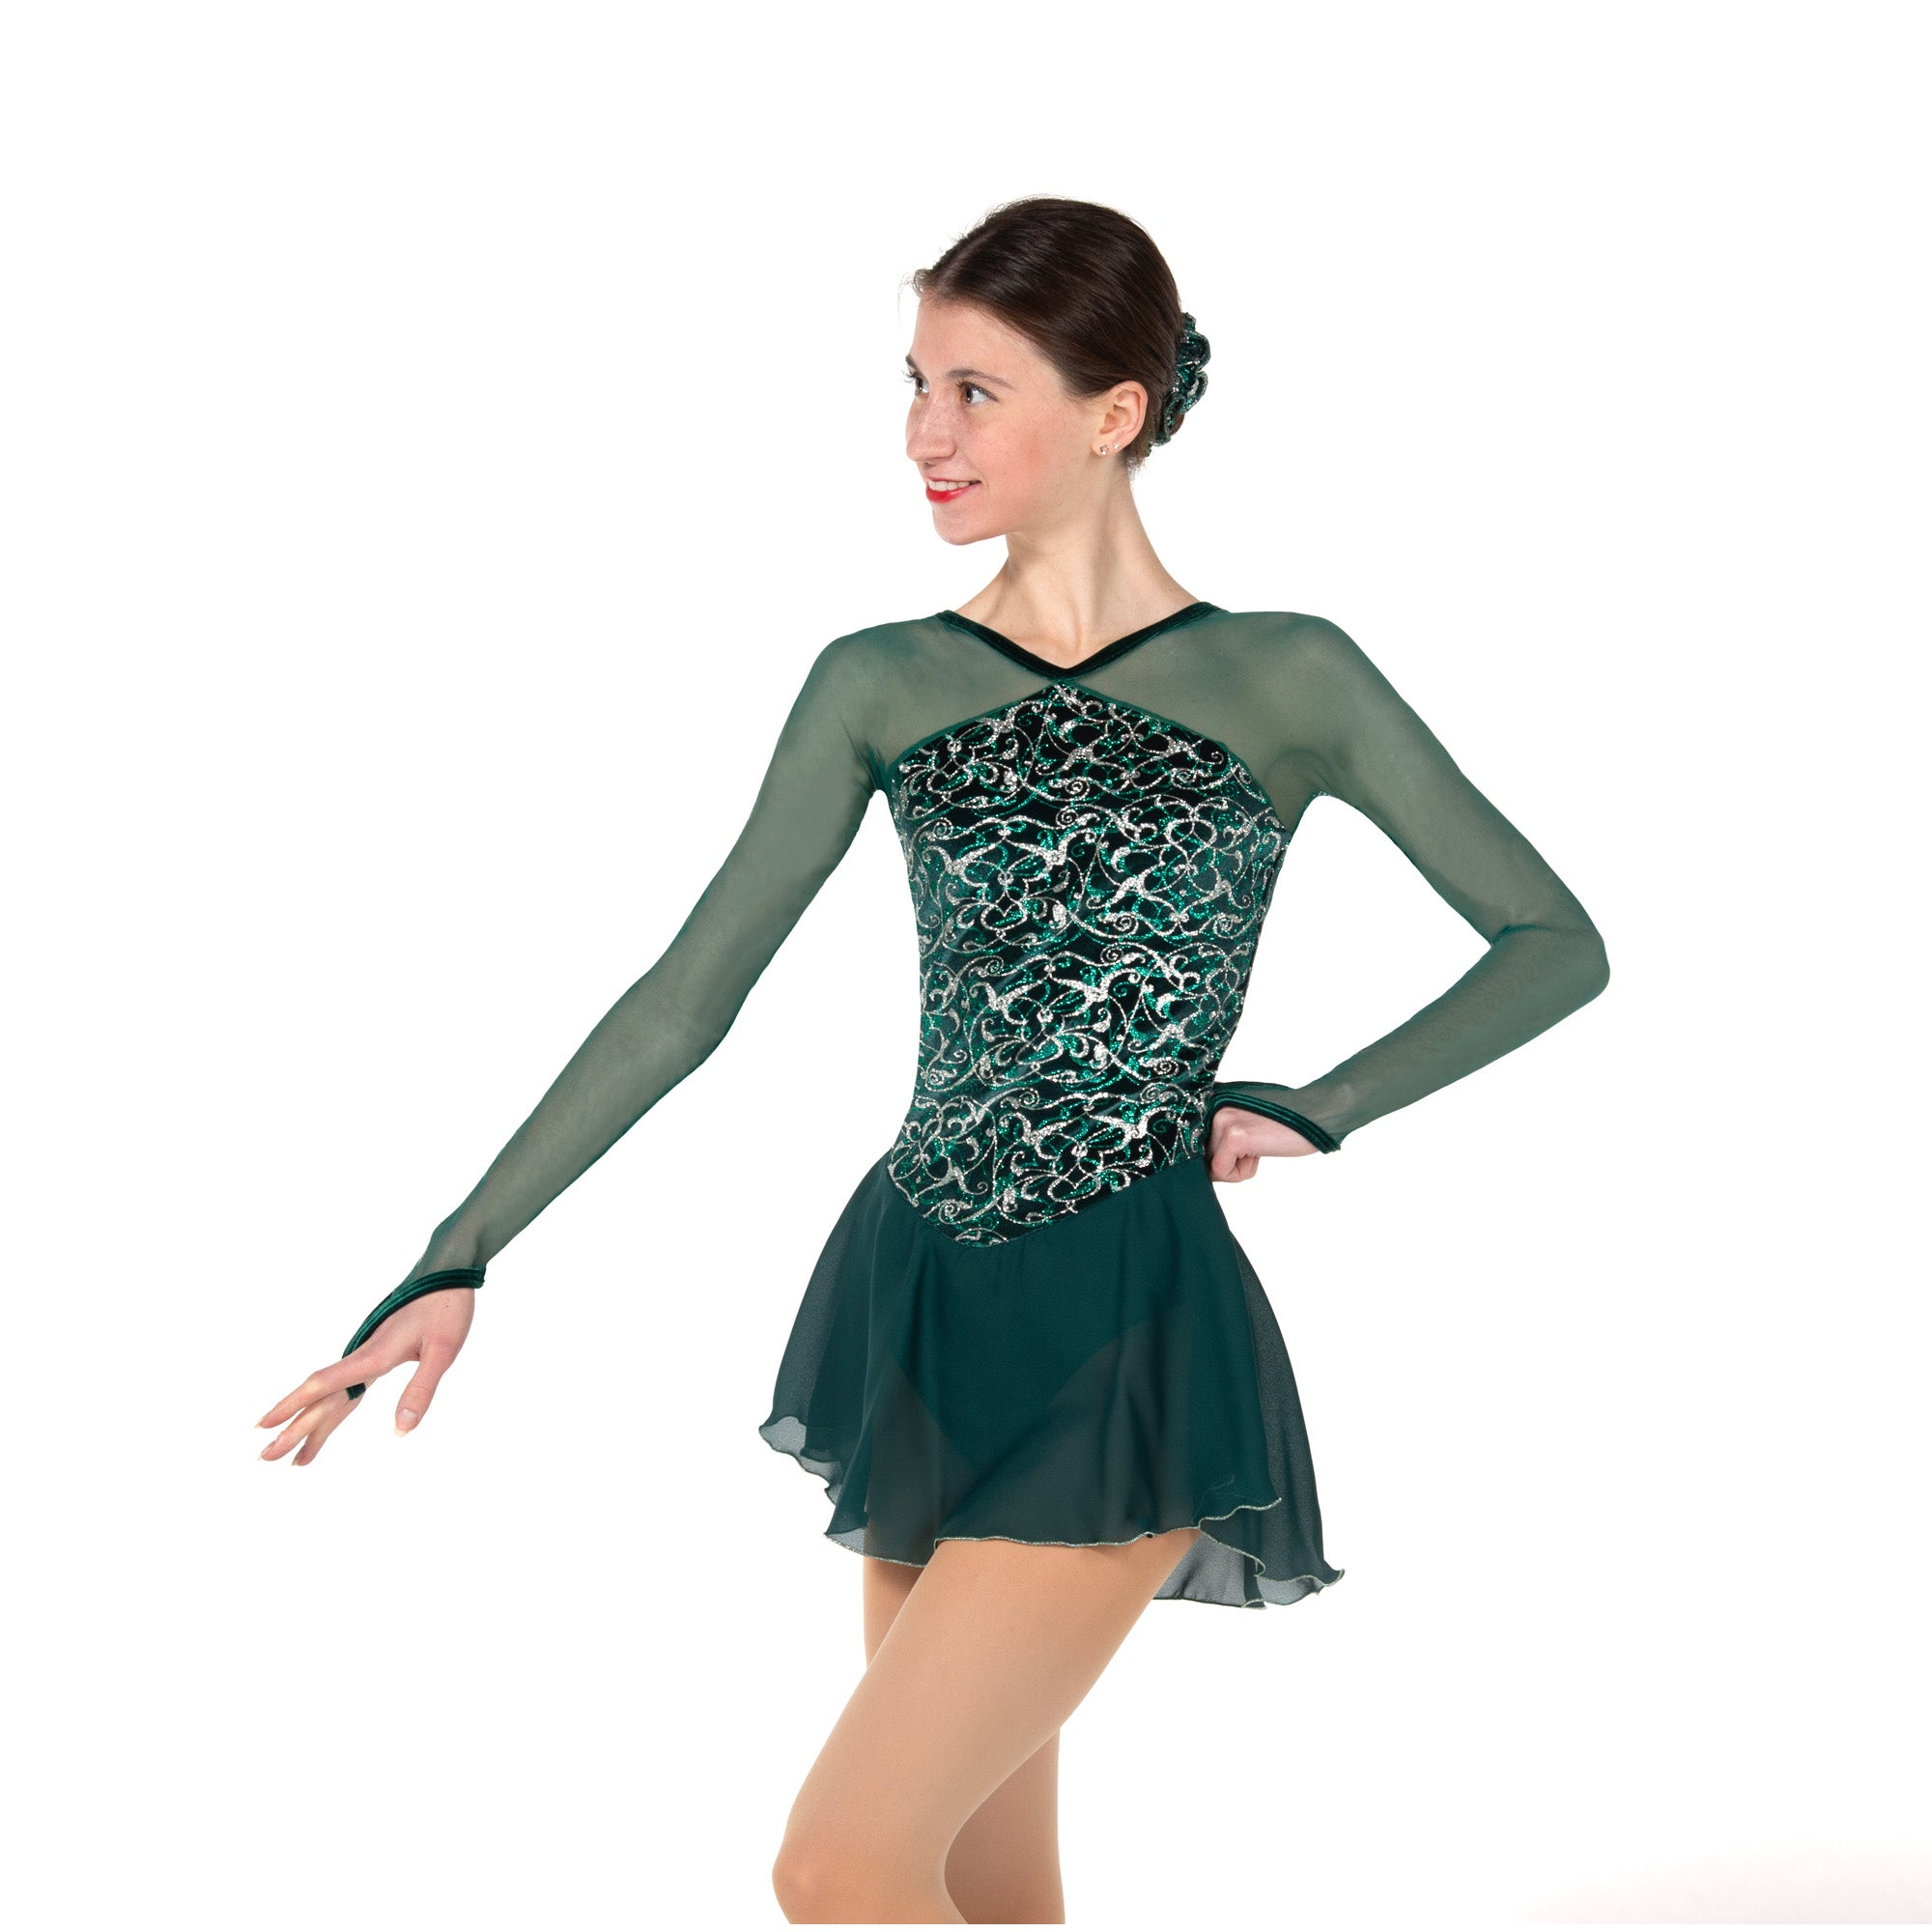 537 Vignette Skating Dress in Pine Green by Jerry's